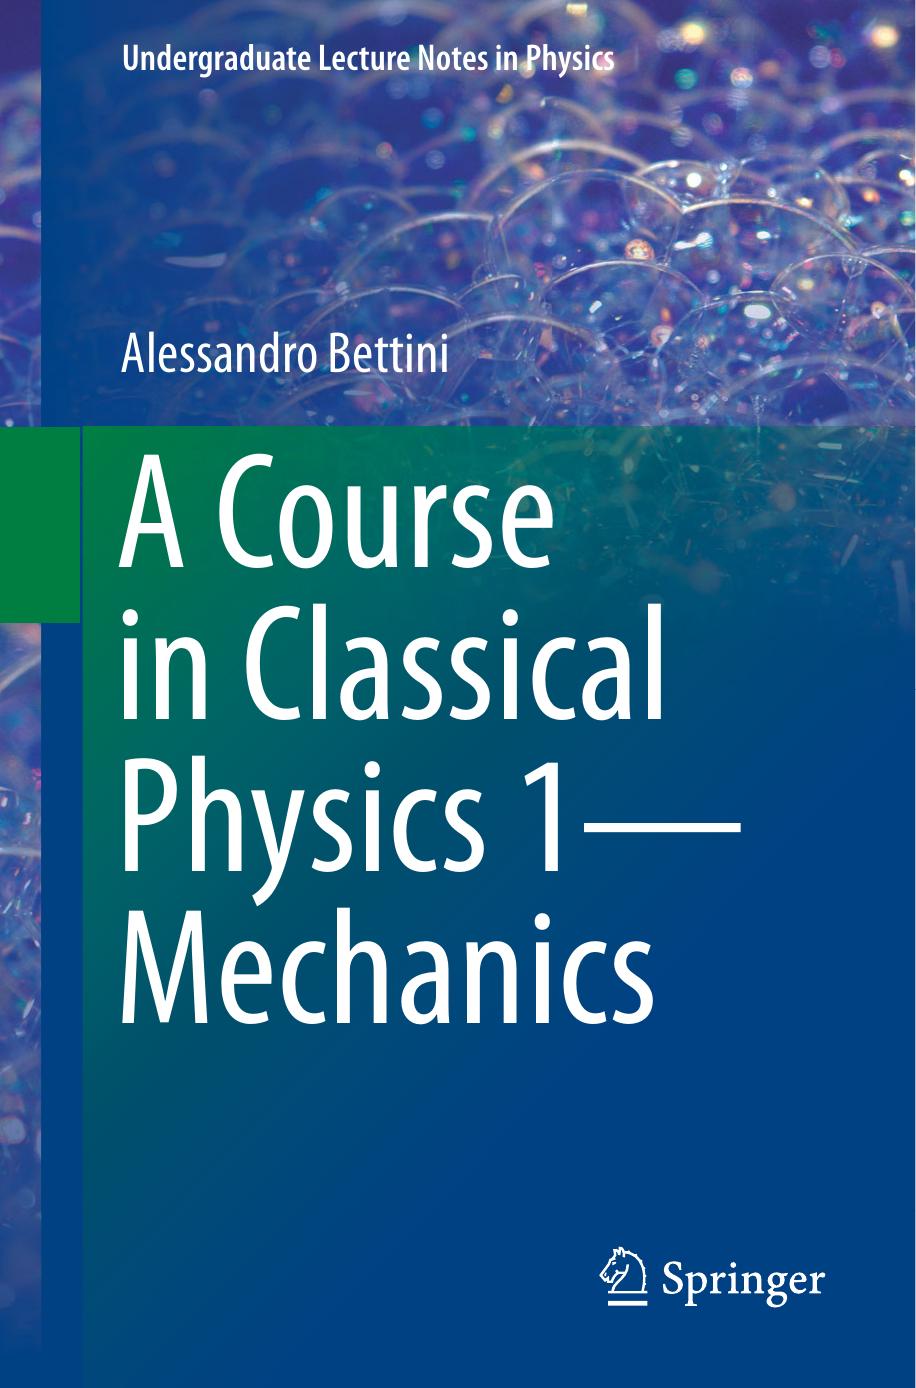 (Undergraduate Lecture Notes in Physics) Alessandro Bettini by A course in classical physics 1 Mechanics-Springer (2016)